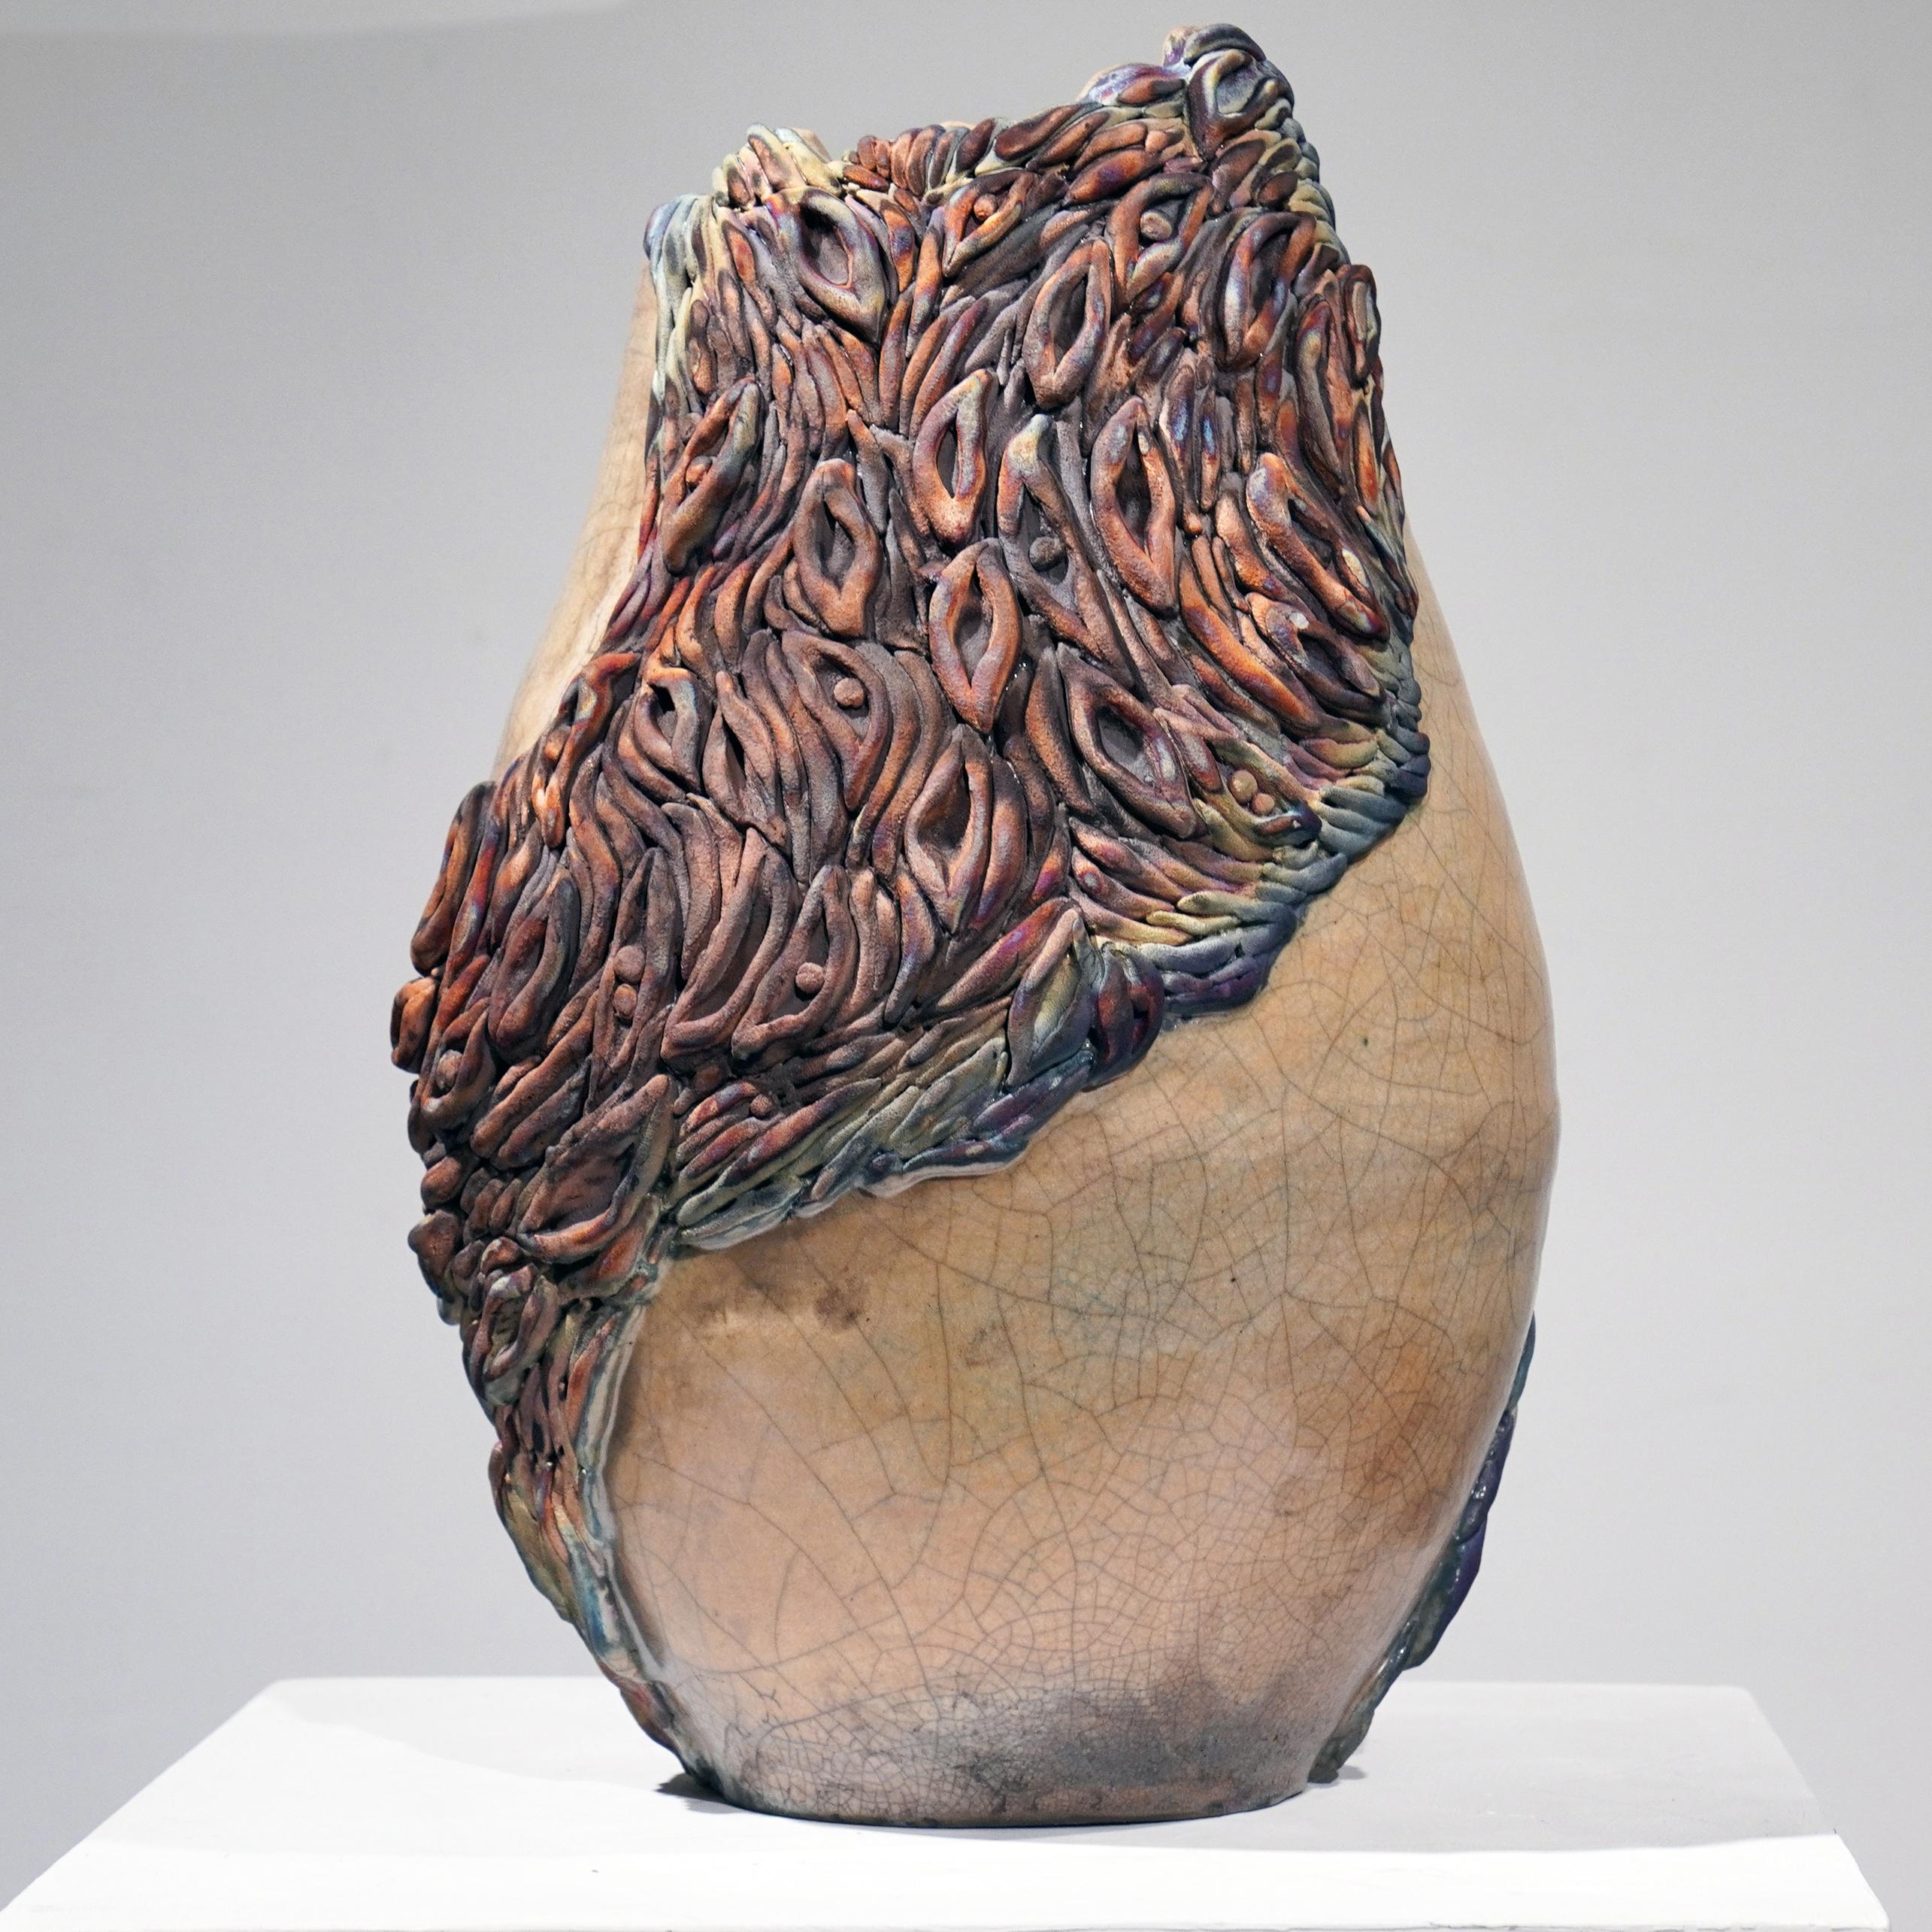 Malaysian Human - life magnified collection raku ceramic pottery sculpture by Adil Ghani For Sale